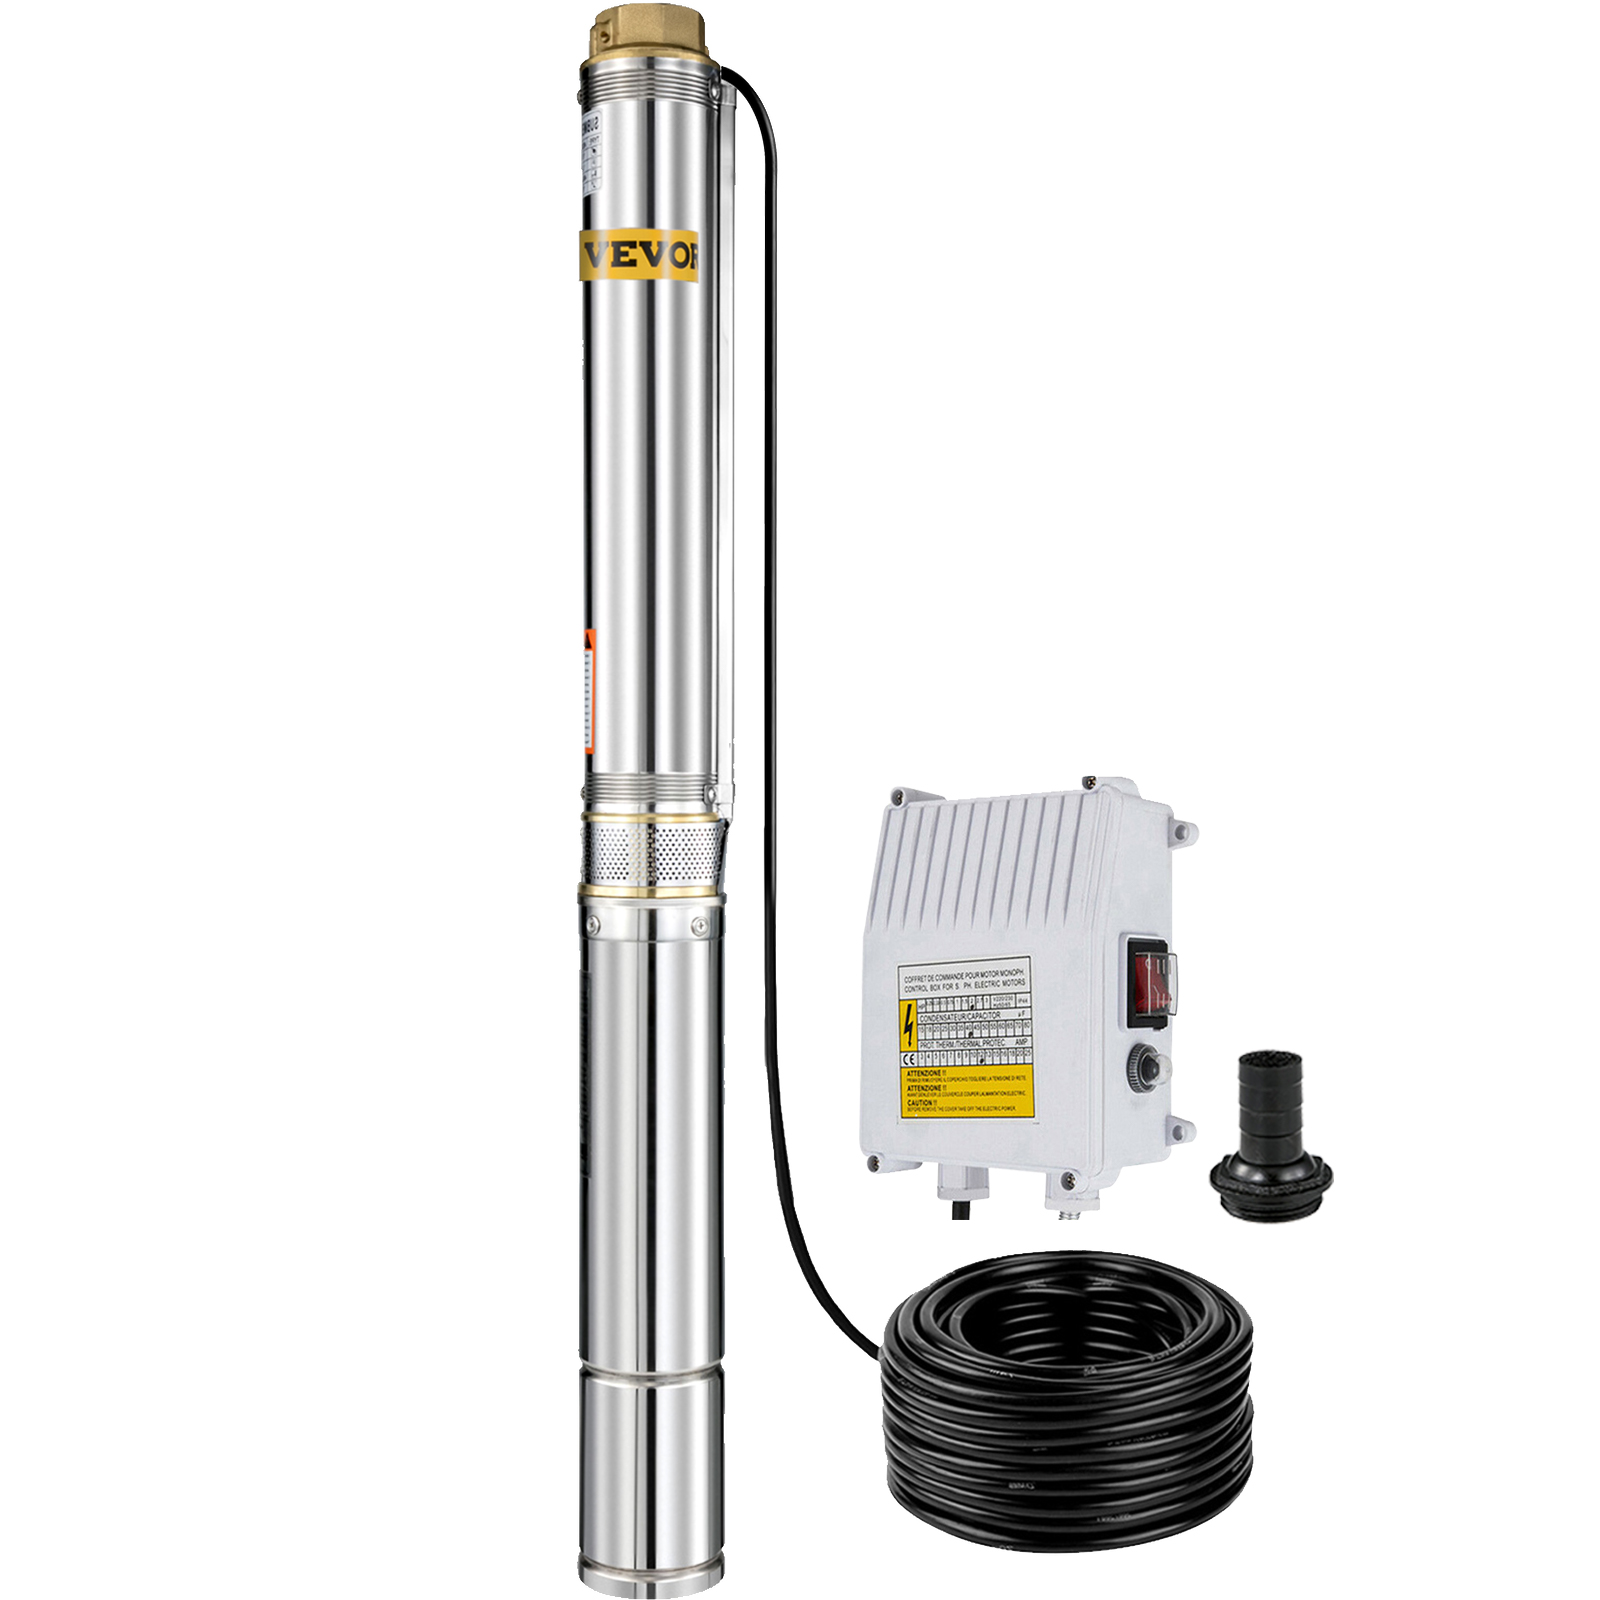 Image of 1.5kw Submersible Deep Well Pump Max 6m3/h Irrigation ø102mm High Admiration